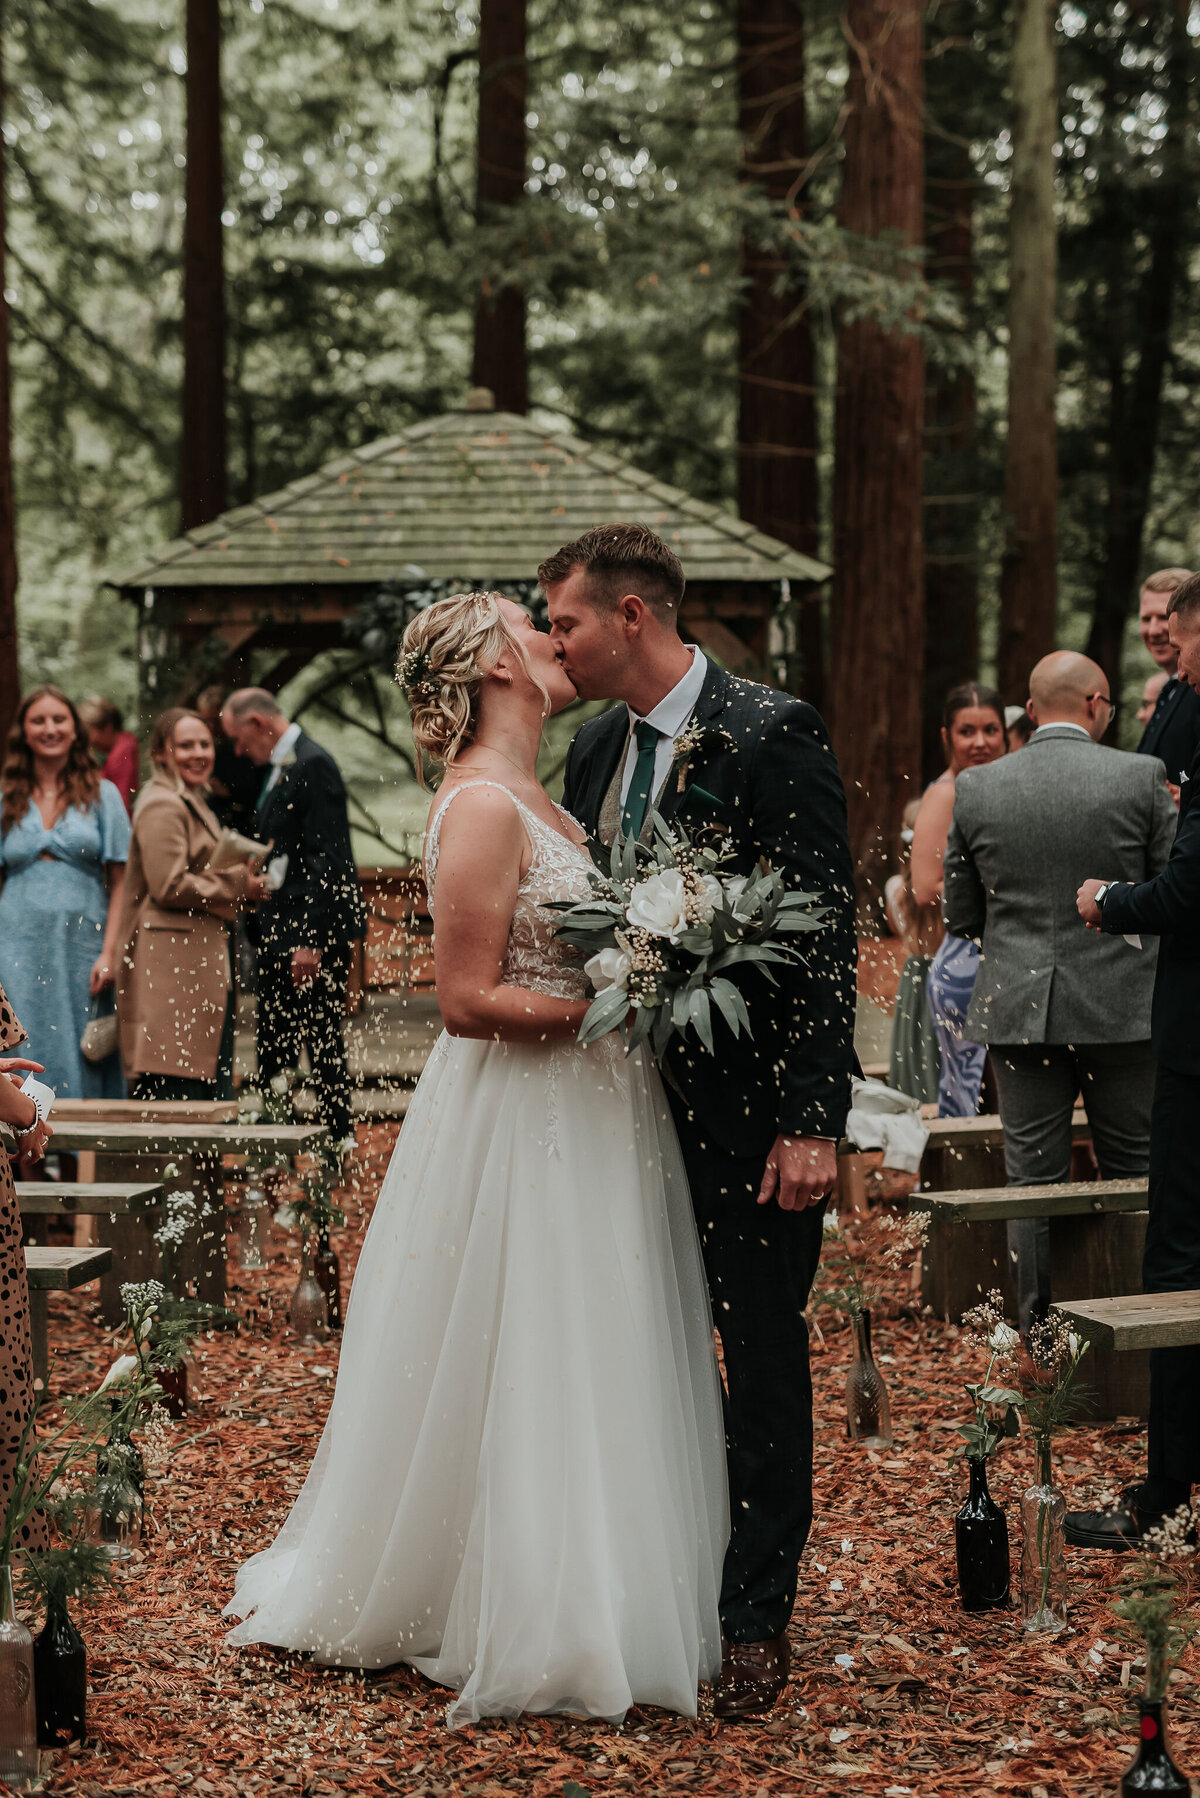 Bride & Groom kiss amongst confetti in the aisle at their woodland ceremony at Two Woods Estate